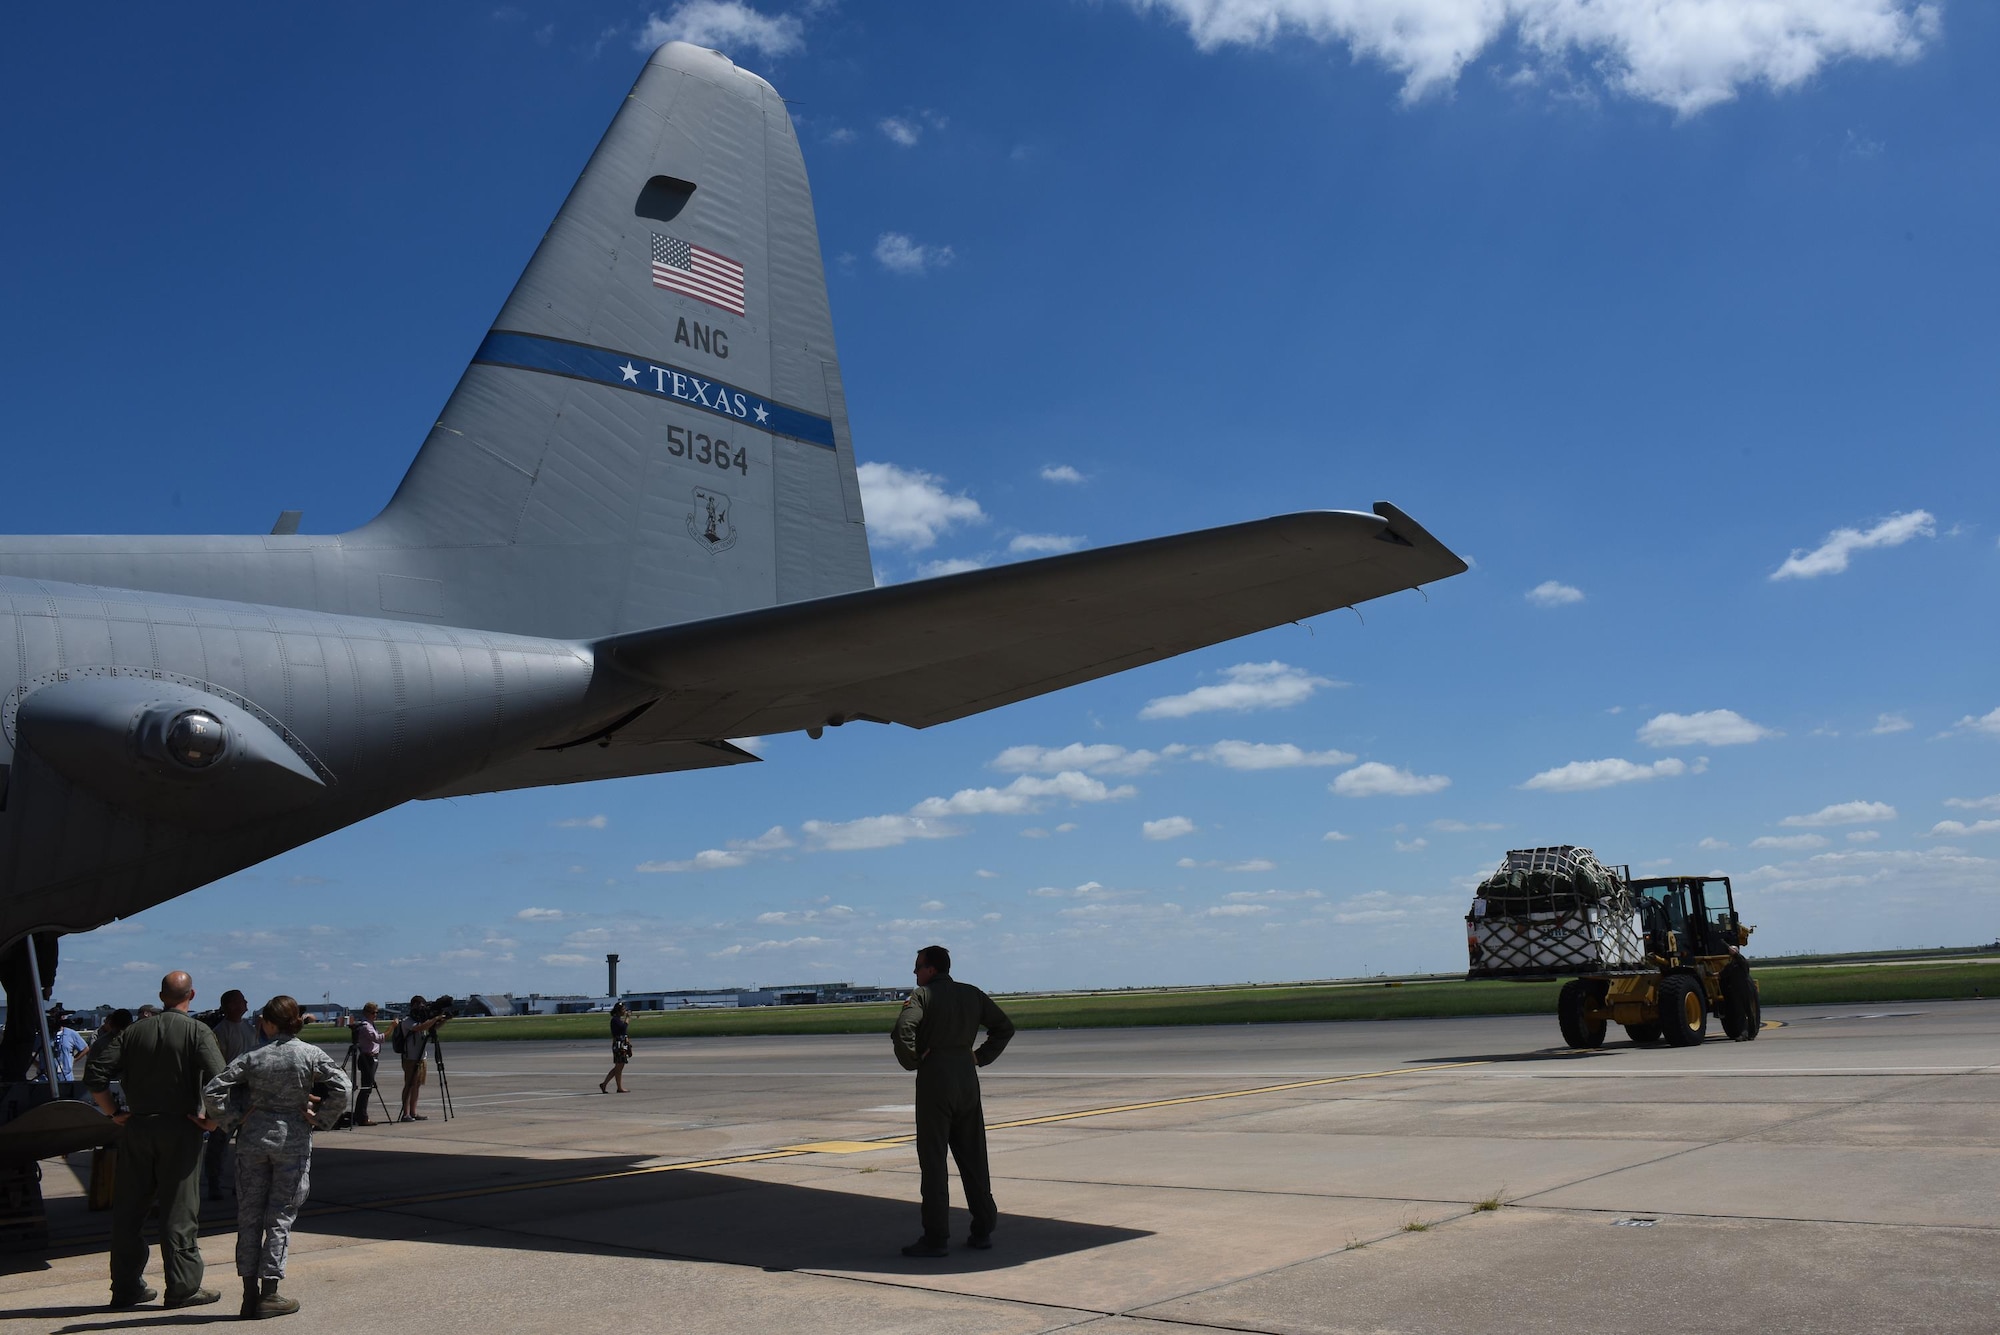 Airmen from the 137th Special Operations Wing, Will Rogers Air National Guard Base, Oklahoma City, and the 136th Airlift Wing from Naval Air Station Fort Worth Joint Reserve Base at Carswell Field, Texas, wait as a second pallet of medical equipment and supplies from the 137th is loaded onto a C-130 Hercules from the 136th, Aug. 28, 2017, at Will Rogers Air National Guard Base. The 137th Special Operations Wing deployed nearly 40 medical and aeromedical evacuation Airmen and equipment in support of the Texas Military Department and their relief efforts following Hurricane Harvey. (U.S. Air National Guard photo by Staff Sgt. Kasey Phipps/Released)